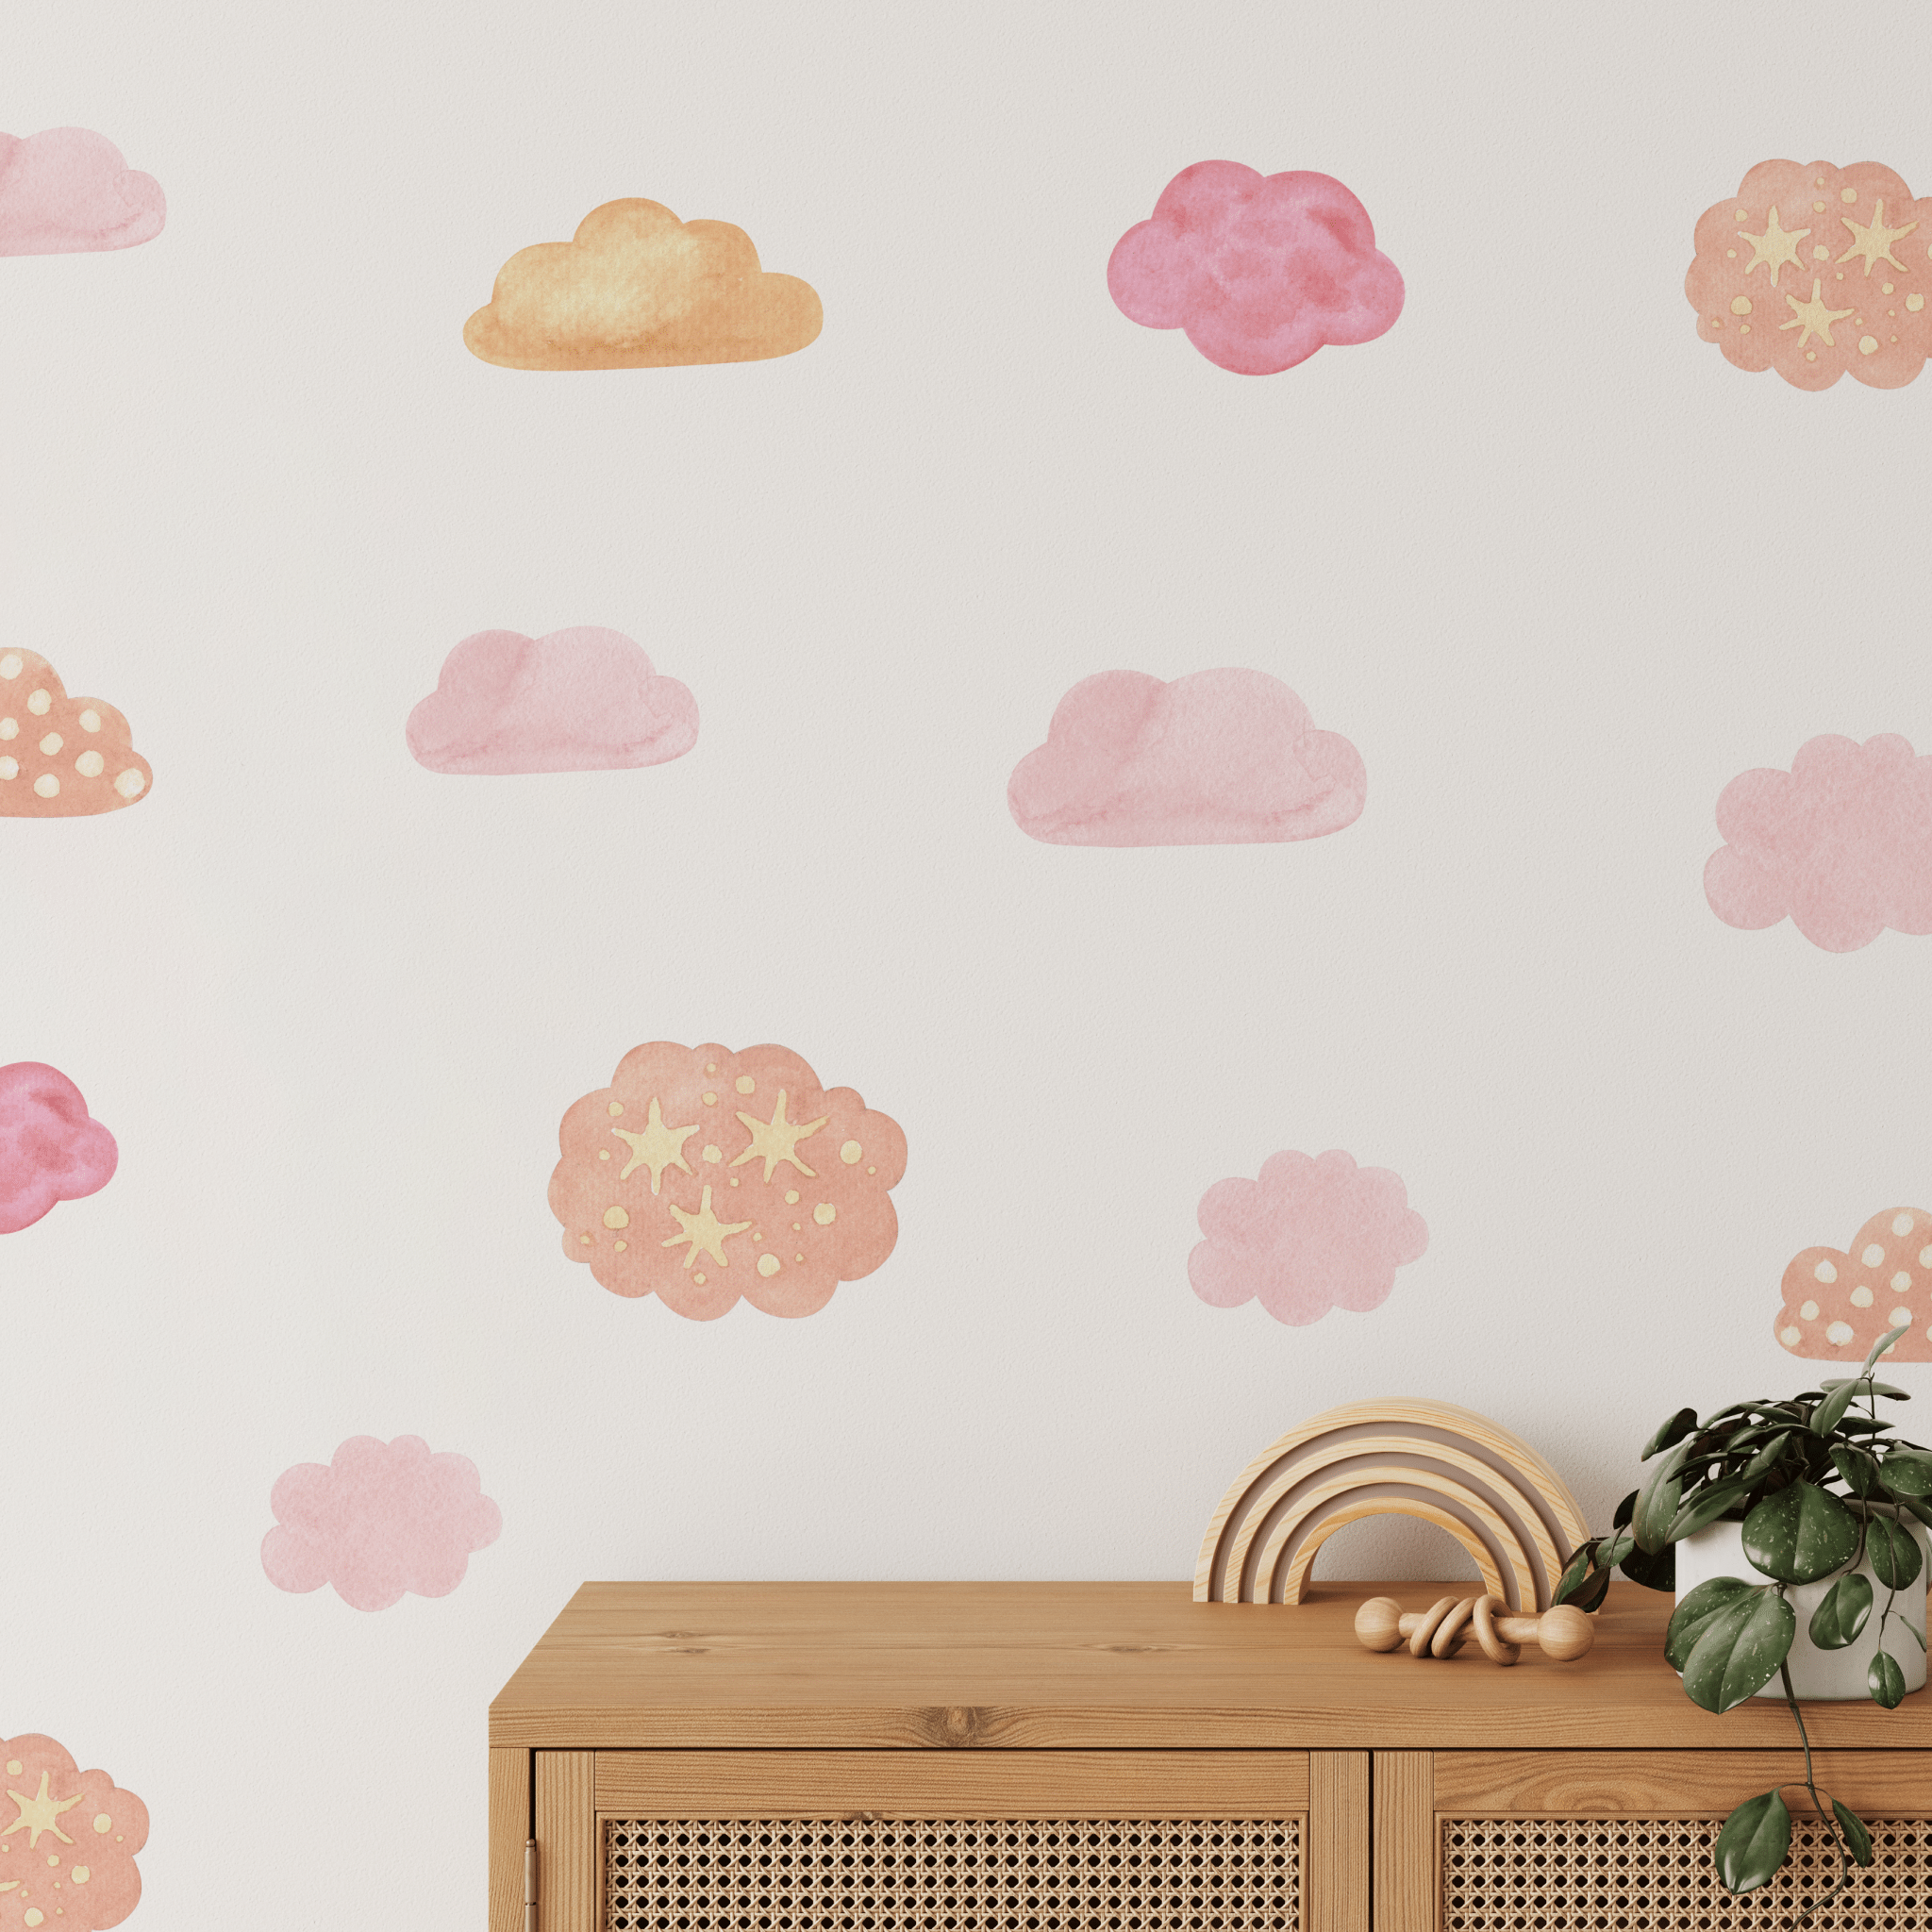 A nursery room wall decorated with watercolor wall stickers of clouds in shades of pink and gold, with a wooden toy rainbow on a cabinet and a hanging plant